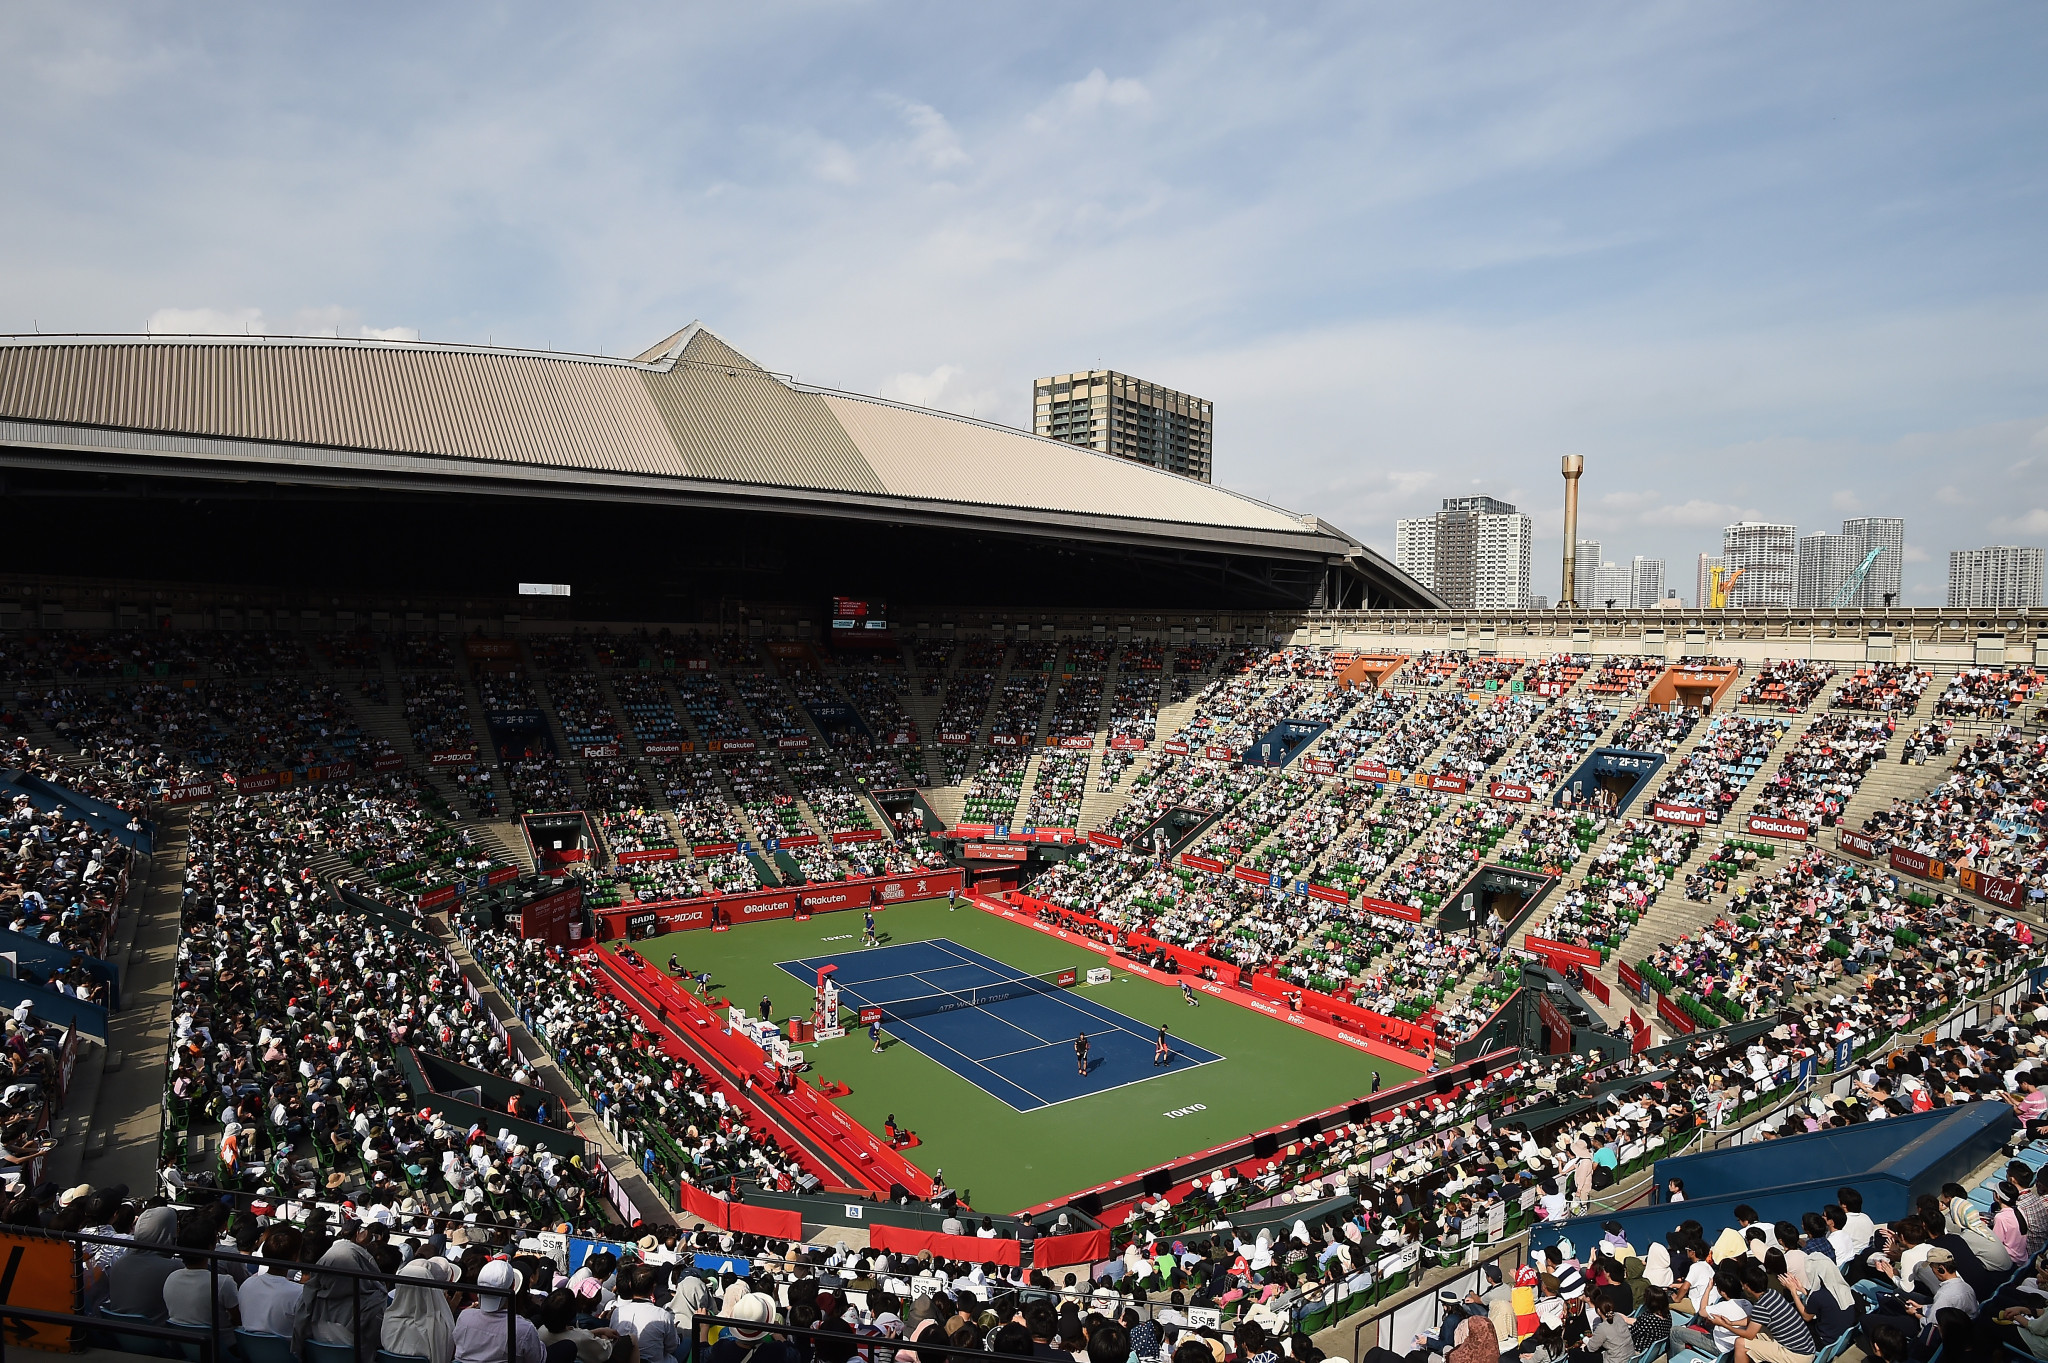 Tennis events at Tokyo 2020 will be held at the Ariake Tennis Park ©Getty Images